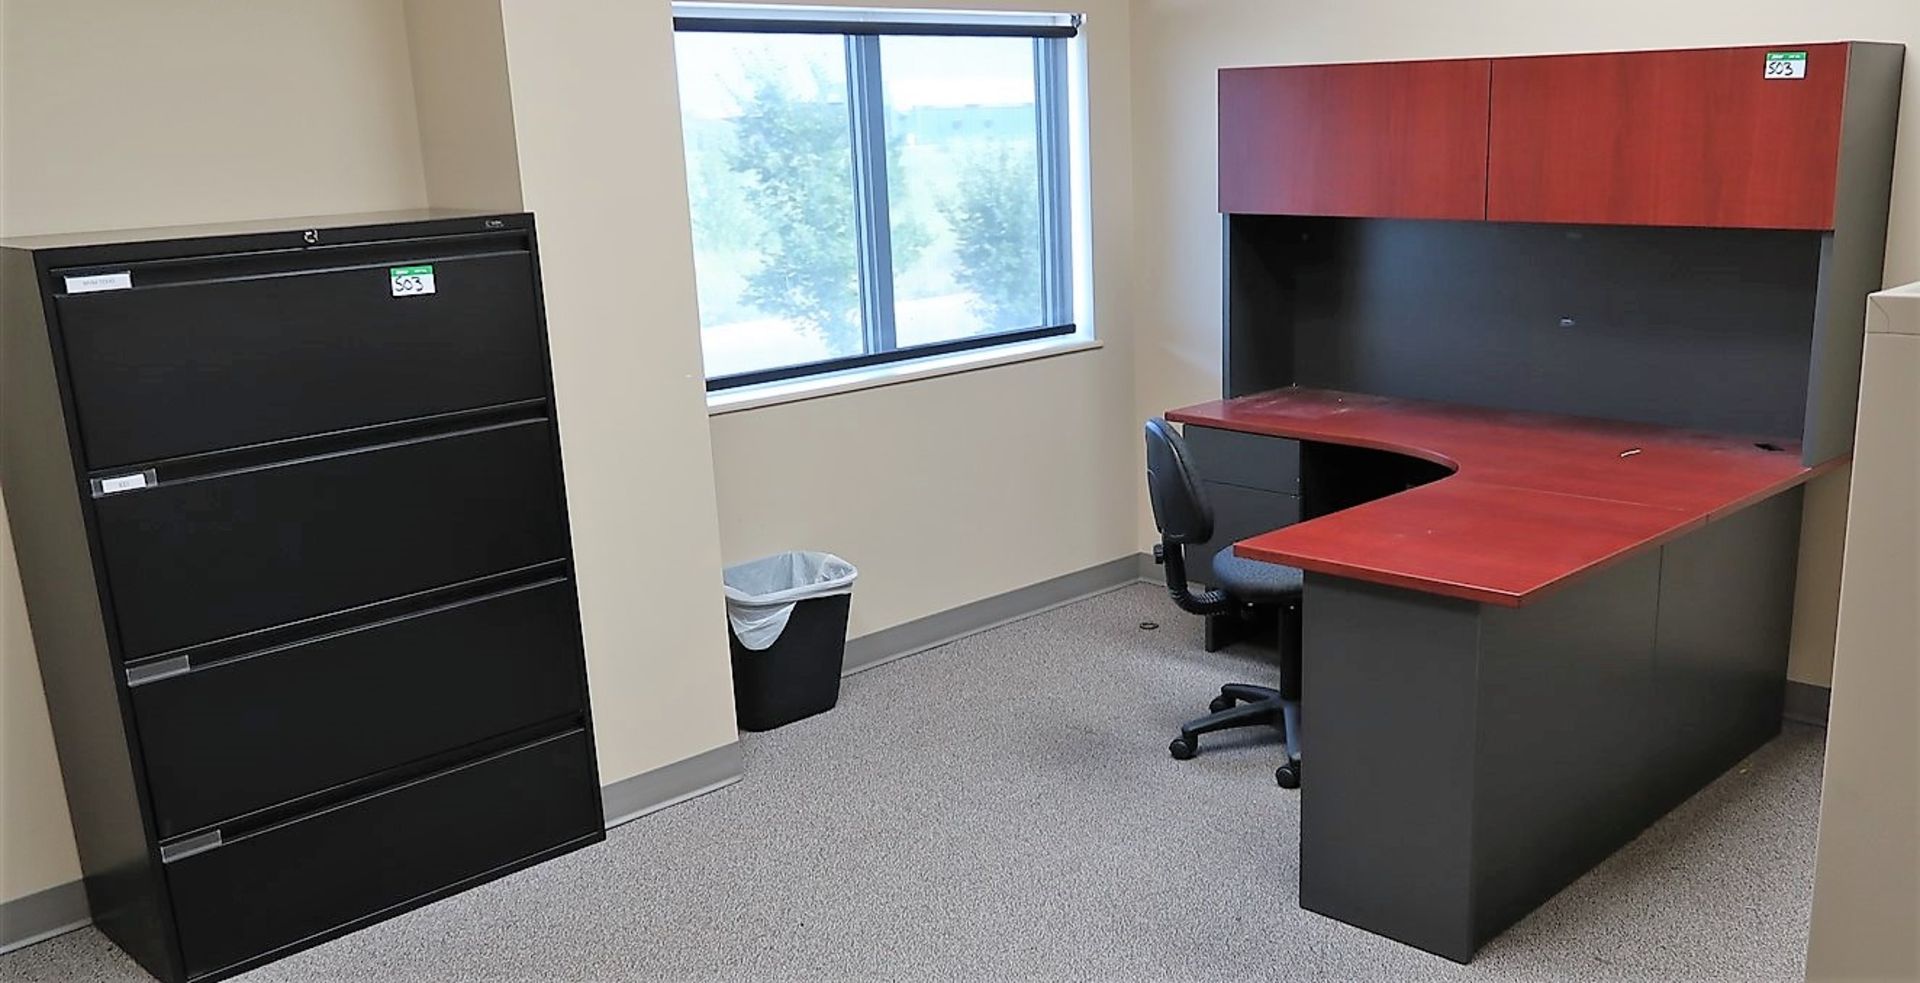 CONTENTS OF OFFICE - L-SHAPE DESK, 2-4 DRAWER FILING CABINET, 2 CHAIRS